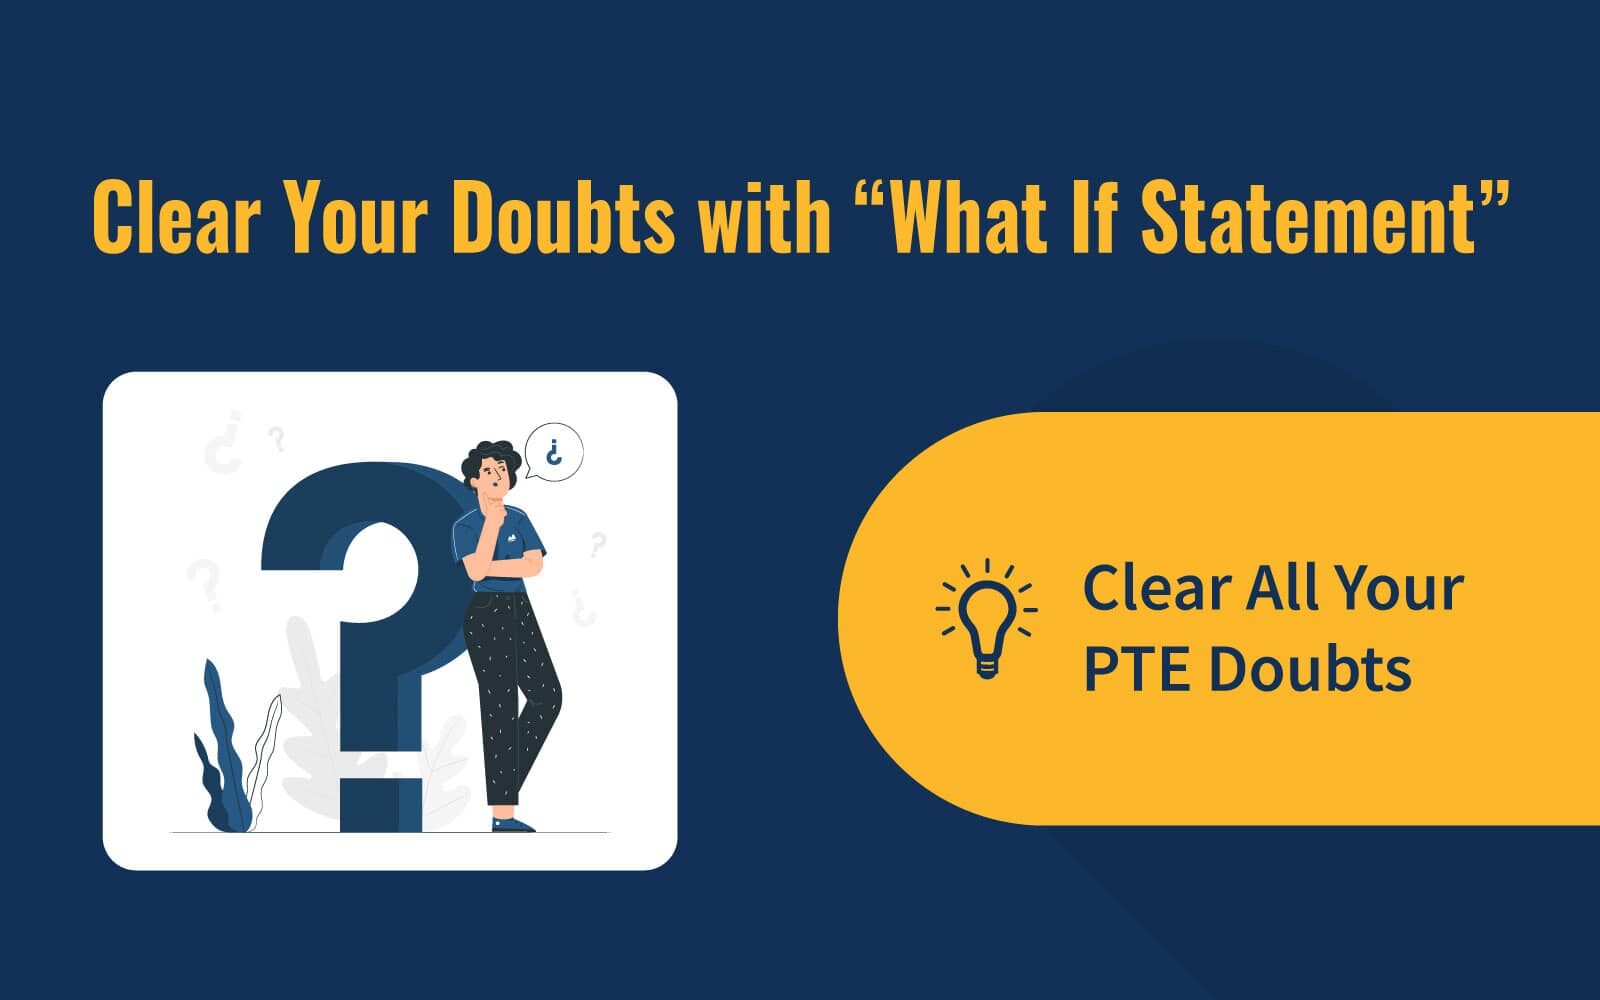 Clear Your Doubts with “What If Statement”